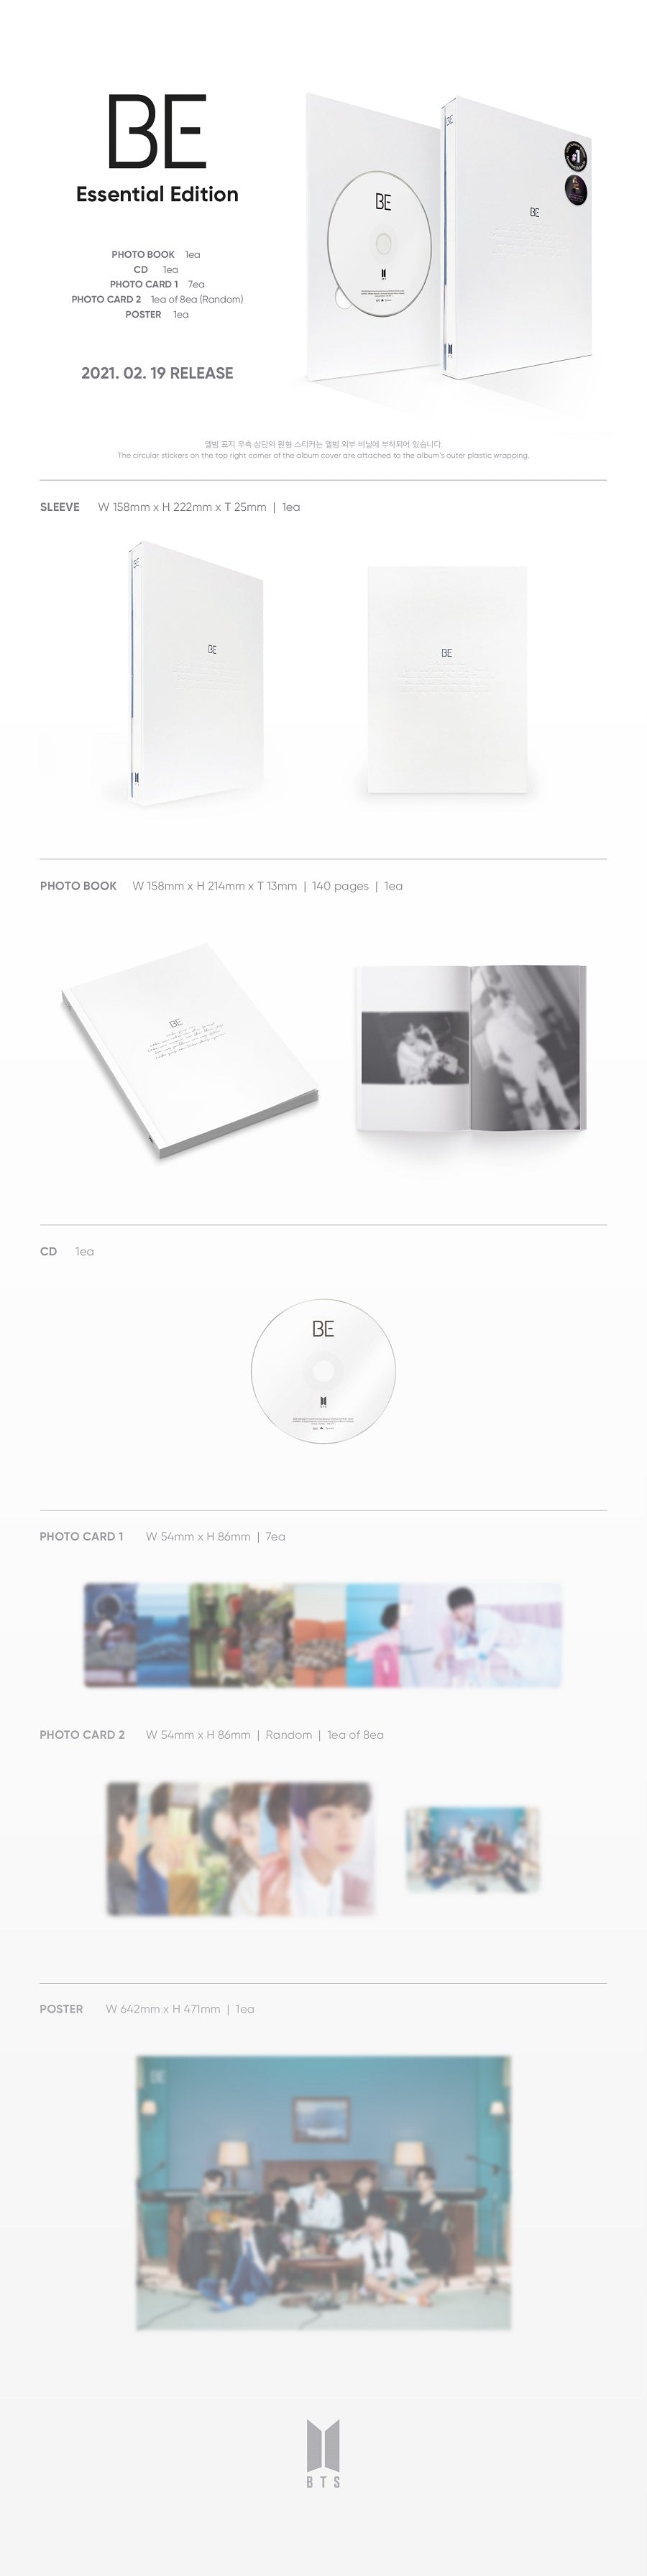 BTS Be (Essential Edition)